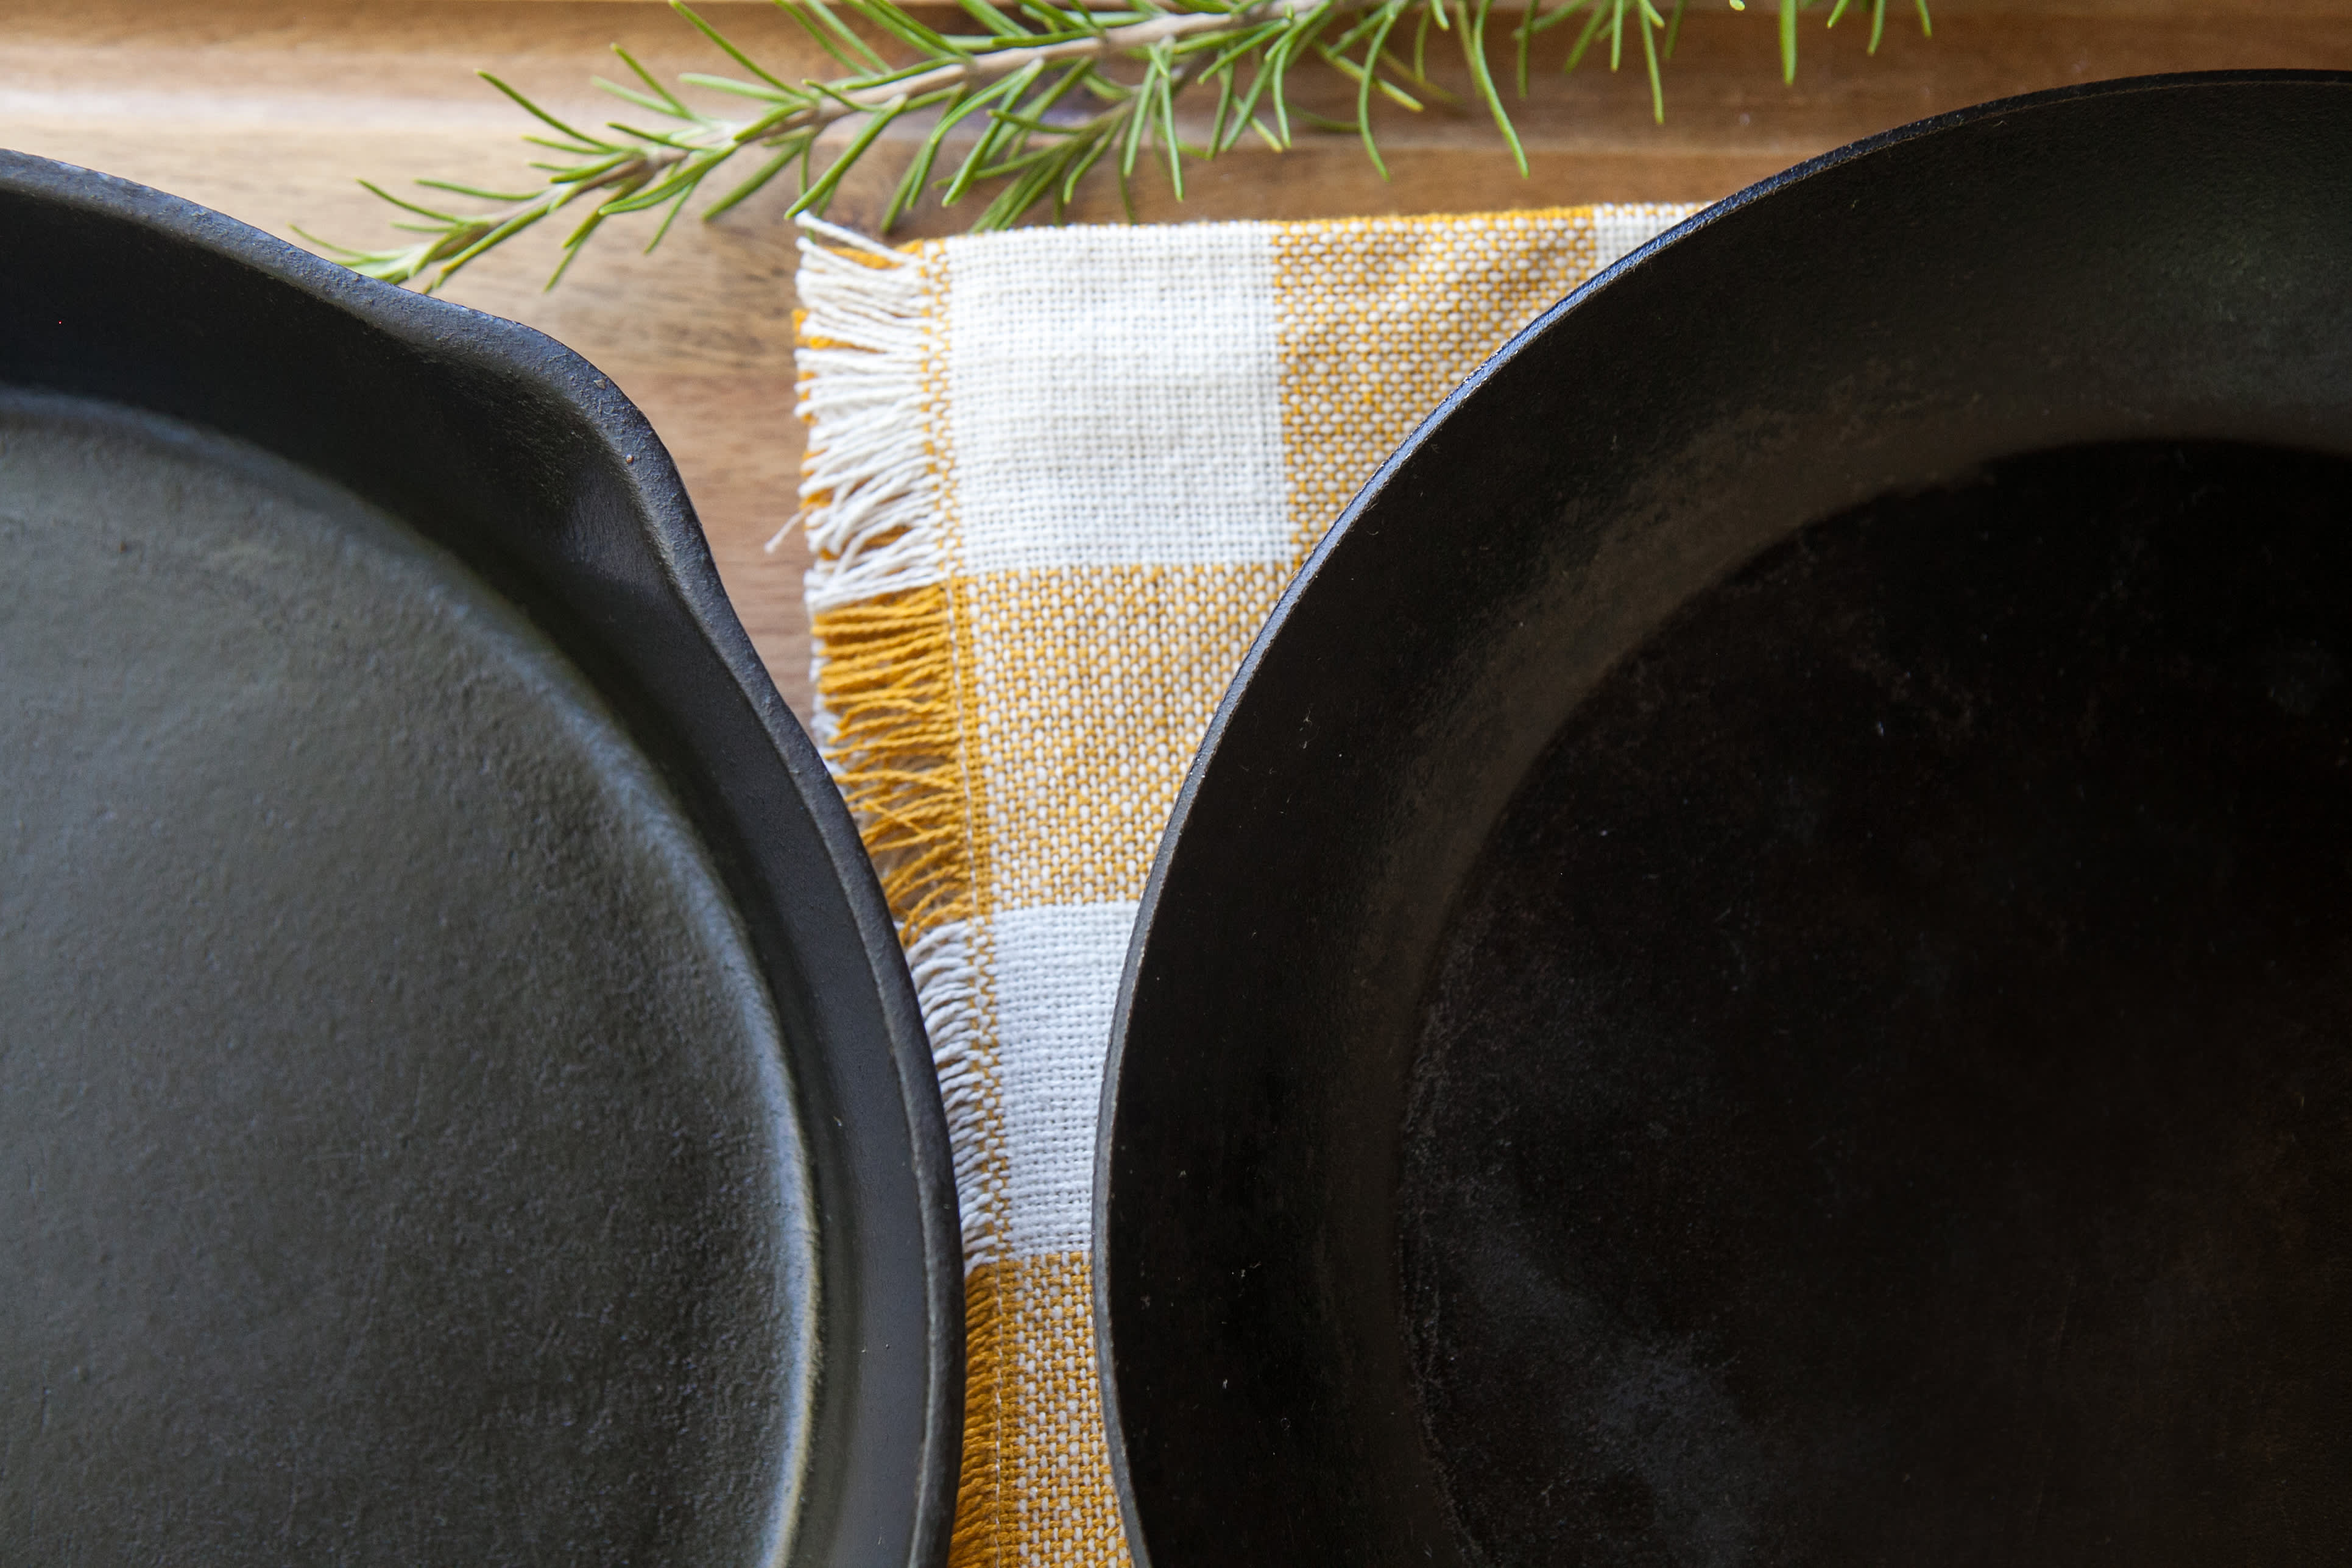 Should olive oil be added to a hot or cold pan?